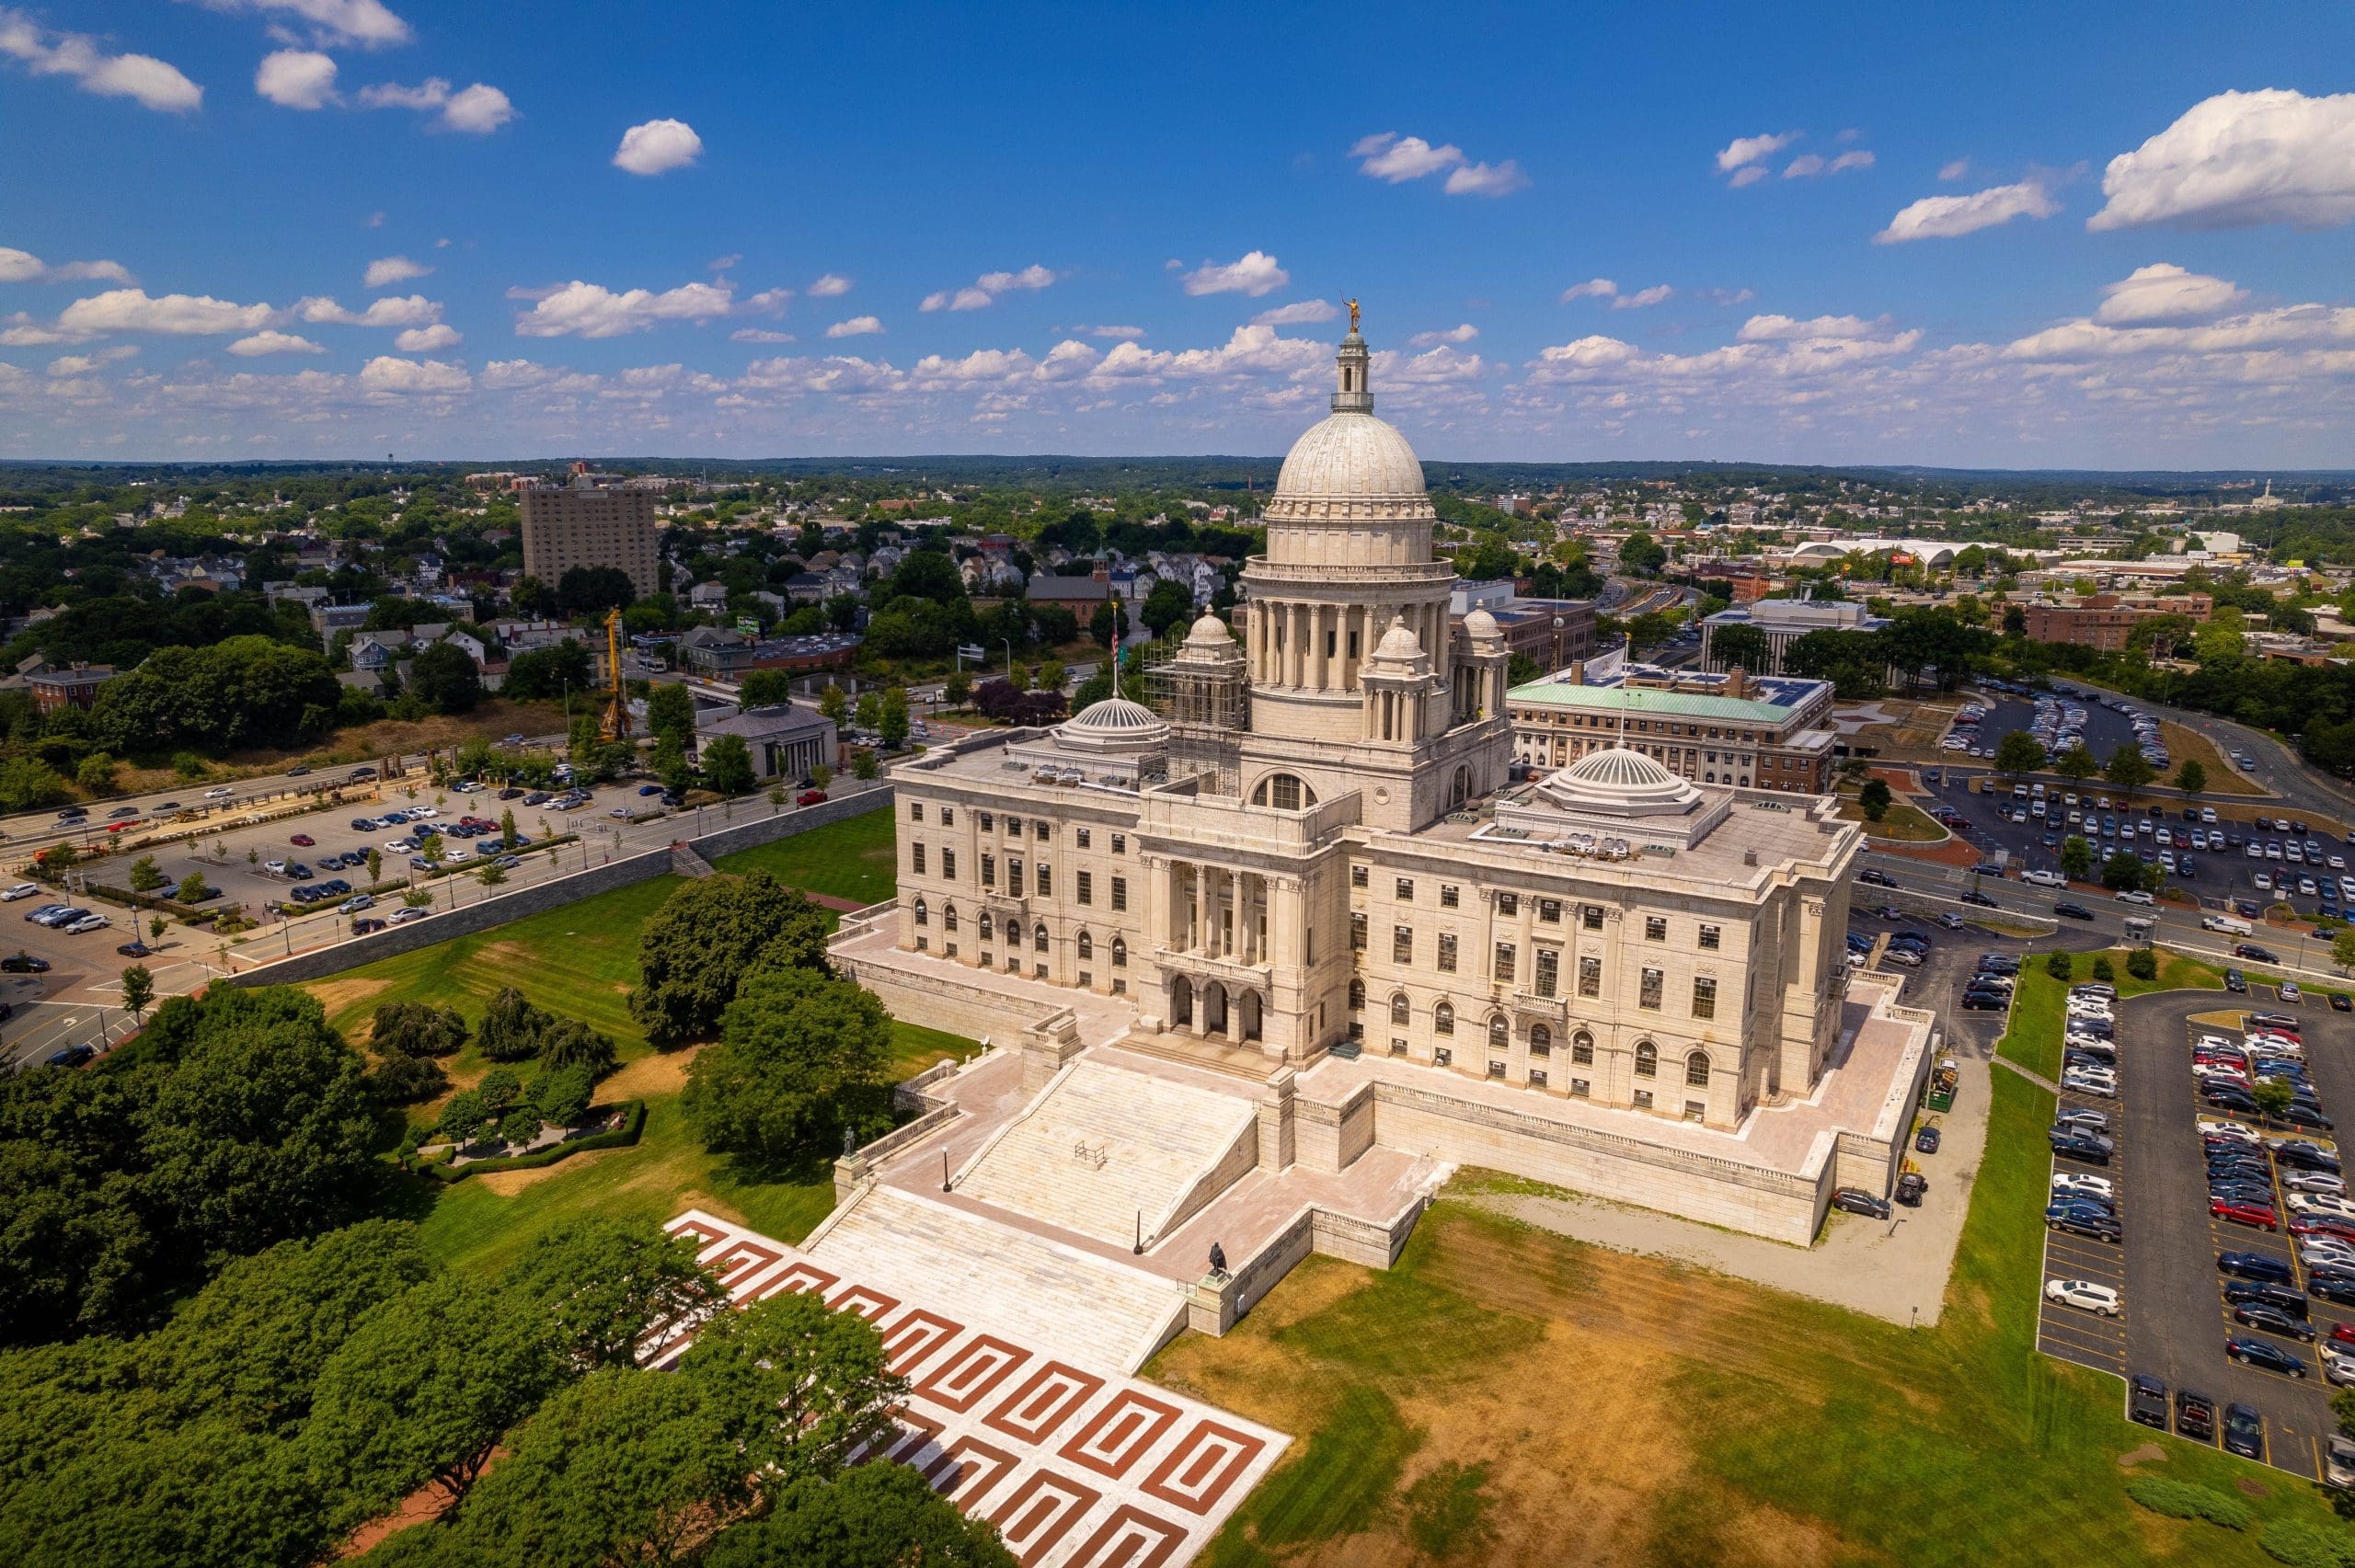 An aerial view of Rhode Island State House in Providence, USA